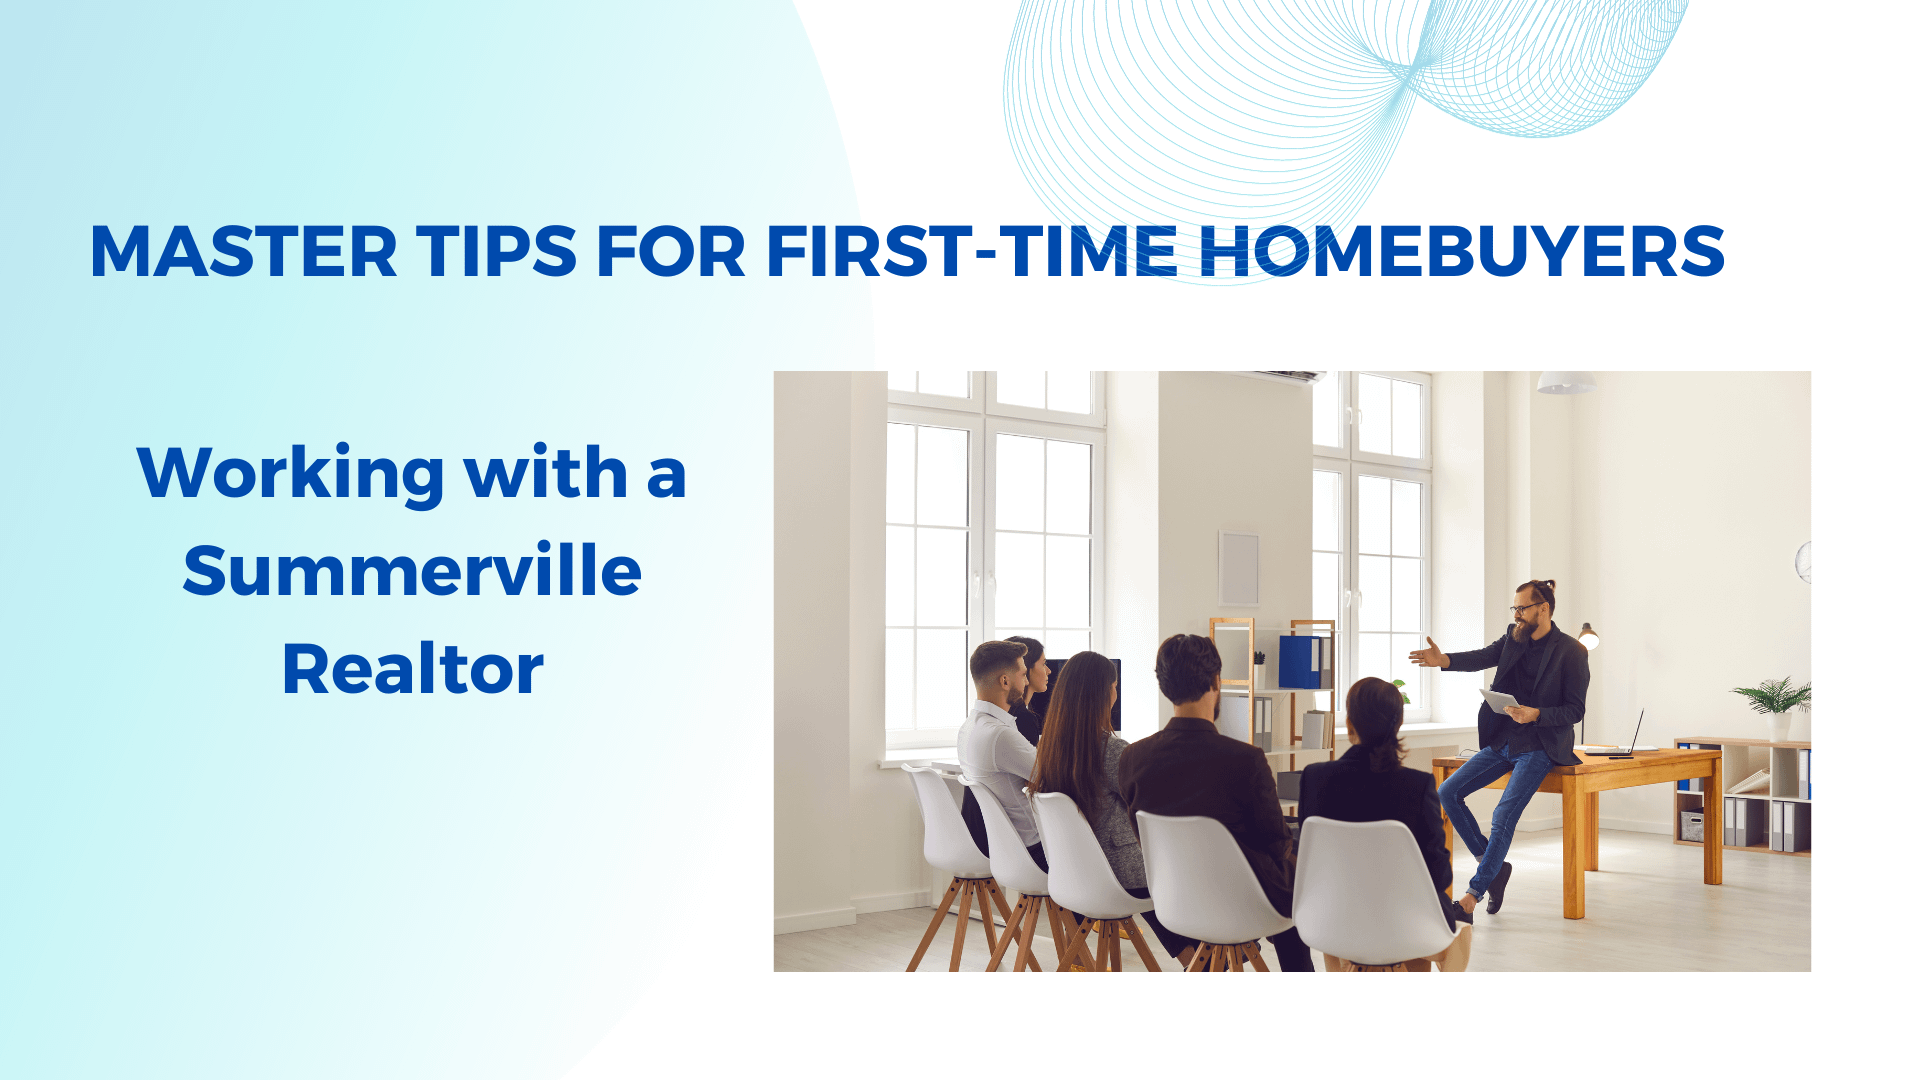 Master Tips for First-Time Homebuyers: Working with a Summerville Realtor